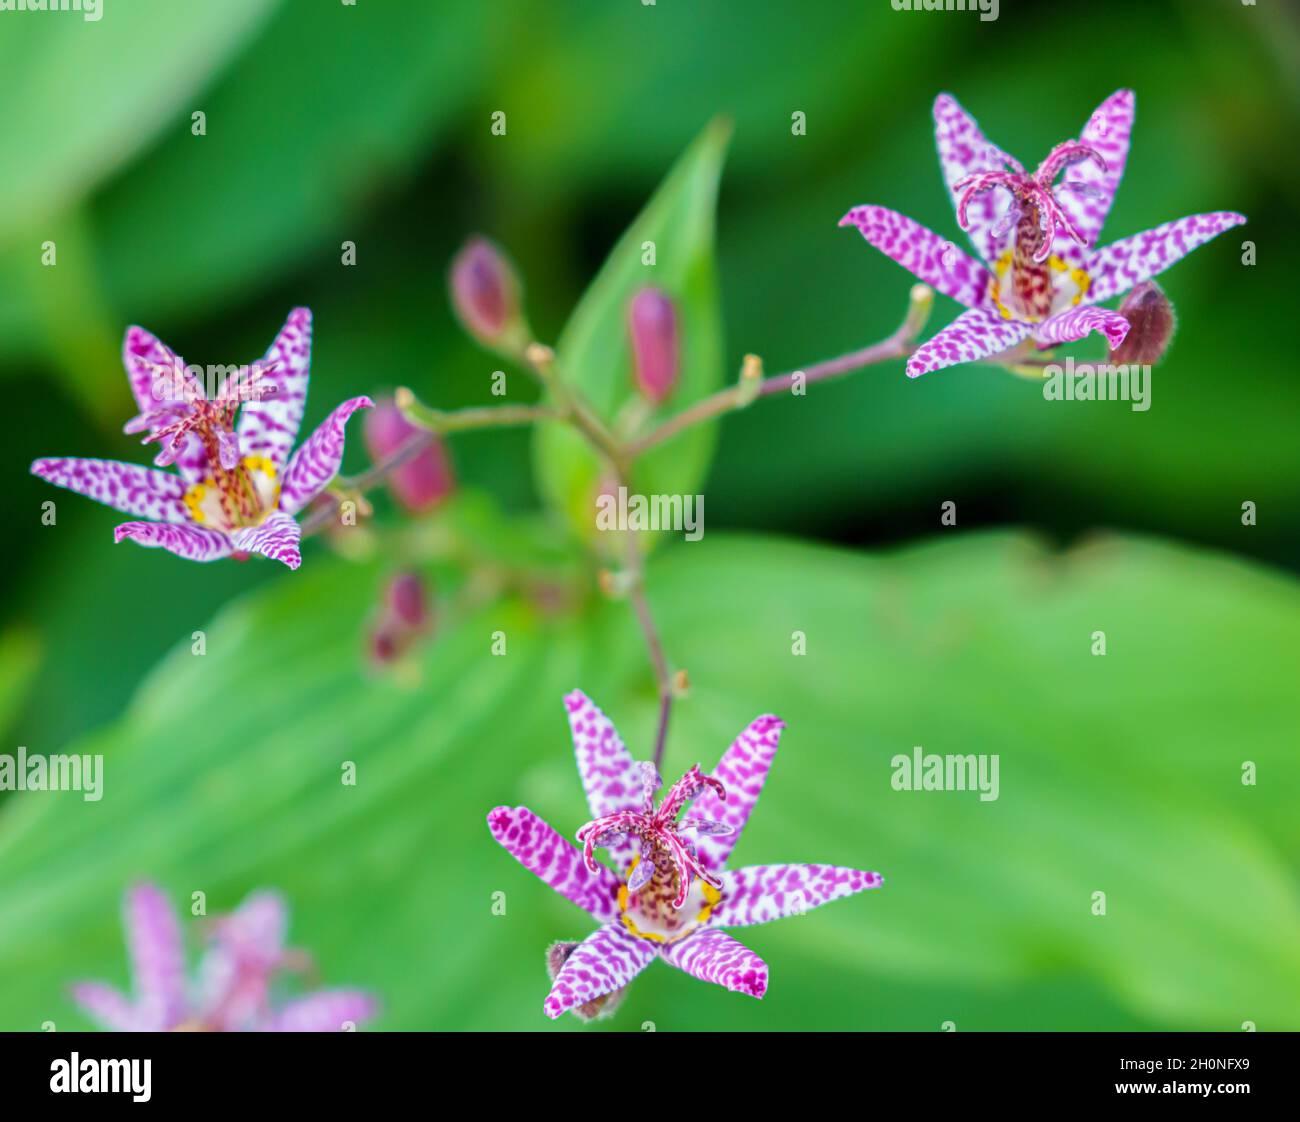 closeup of the beautiful and unusal spotted Japanese Toad Lily (Tricyrtis Hirta) with purple-white flower Stock Photo